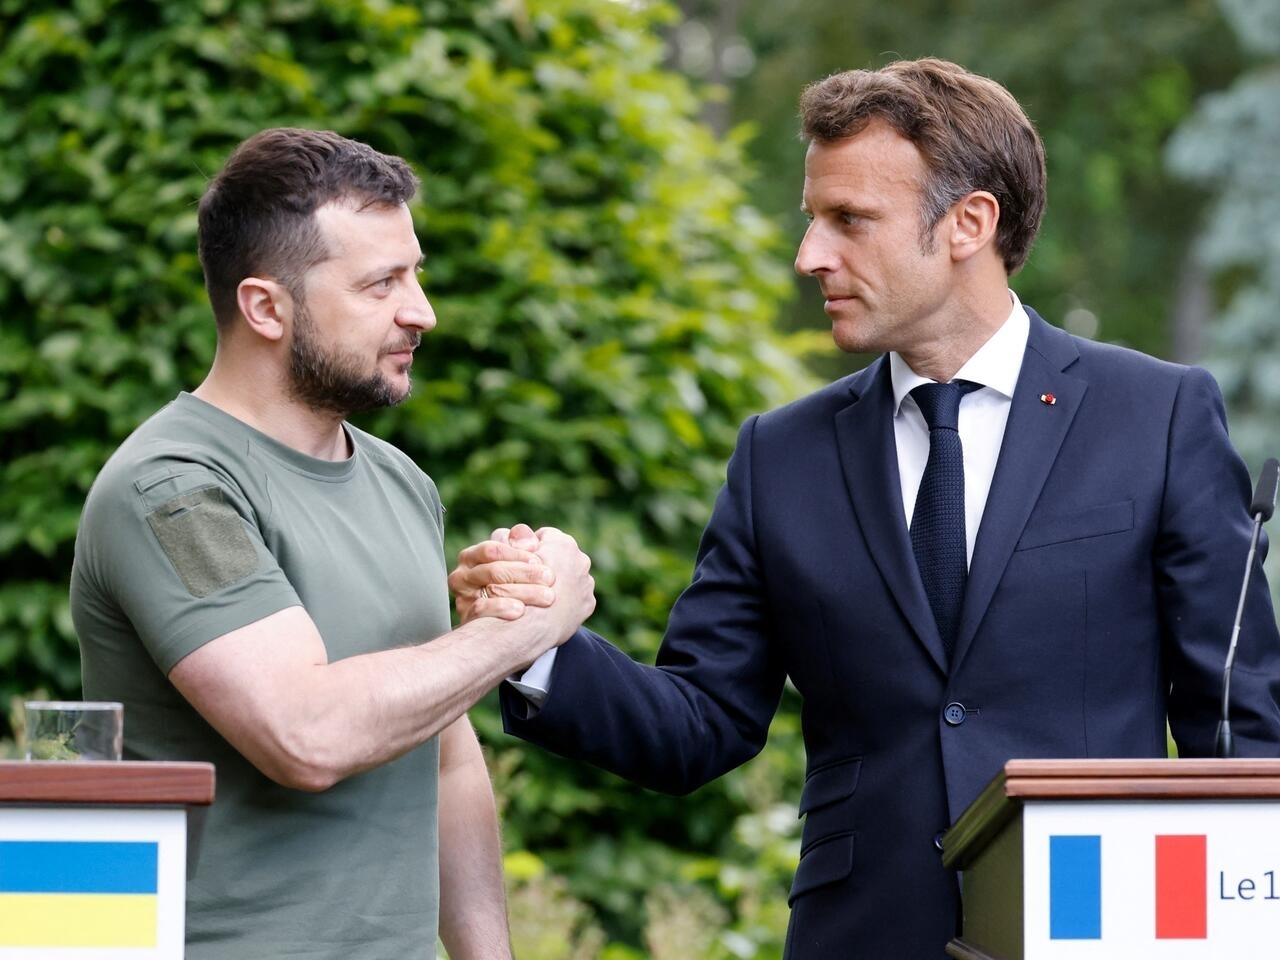 Ukrainian President Volodymyr Zelensky (L) and French Fresident Emmanuel Macron shake hands after giving a press conference in at Mariinsky Palace in Kyiv, on June 16, 2022. - The leaders of major EU powers France, Germany and Italy vowed on June 16 to help Ukraine defeat Russia and to rebuild its shattered cities, in a visit to a war-torn Kyiv suburb. (Photo by Ludovic MARIN / POOL / AFP)